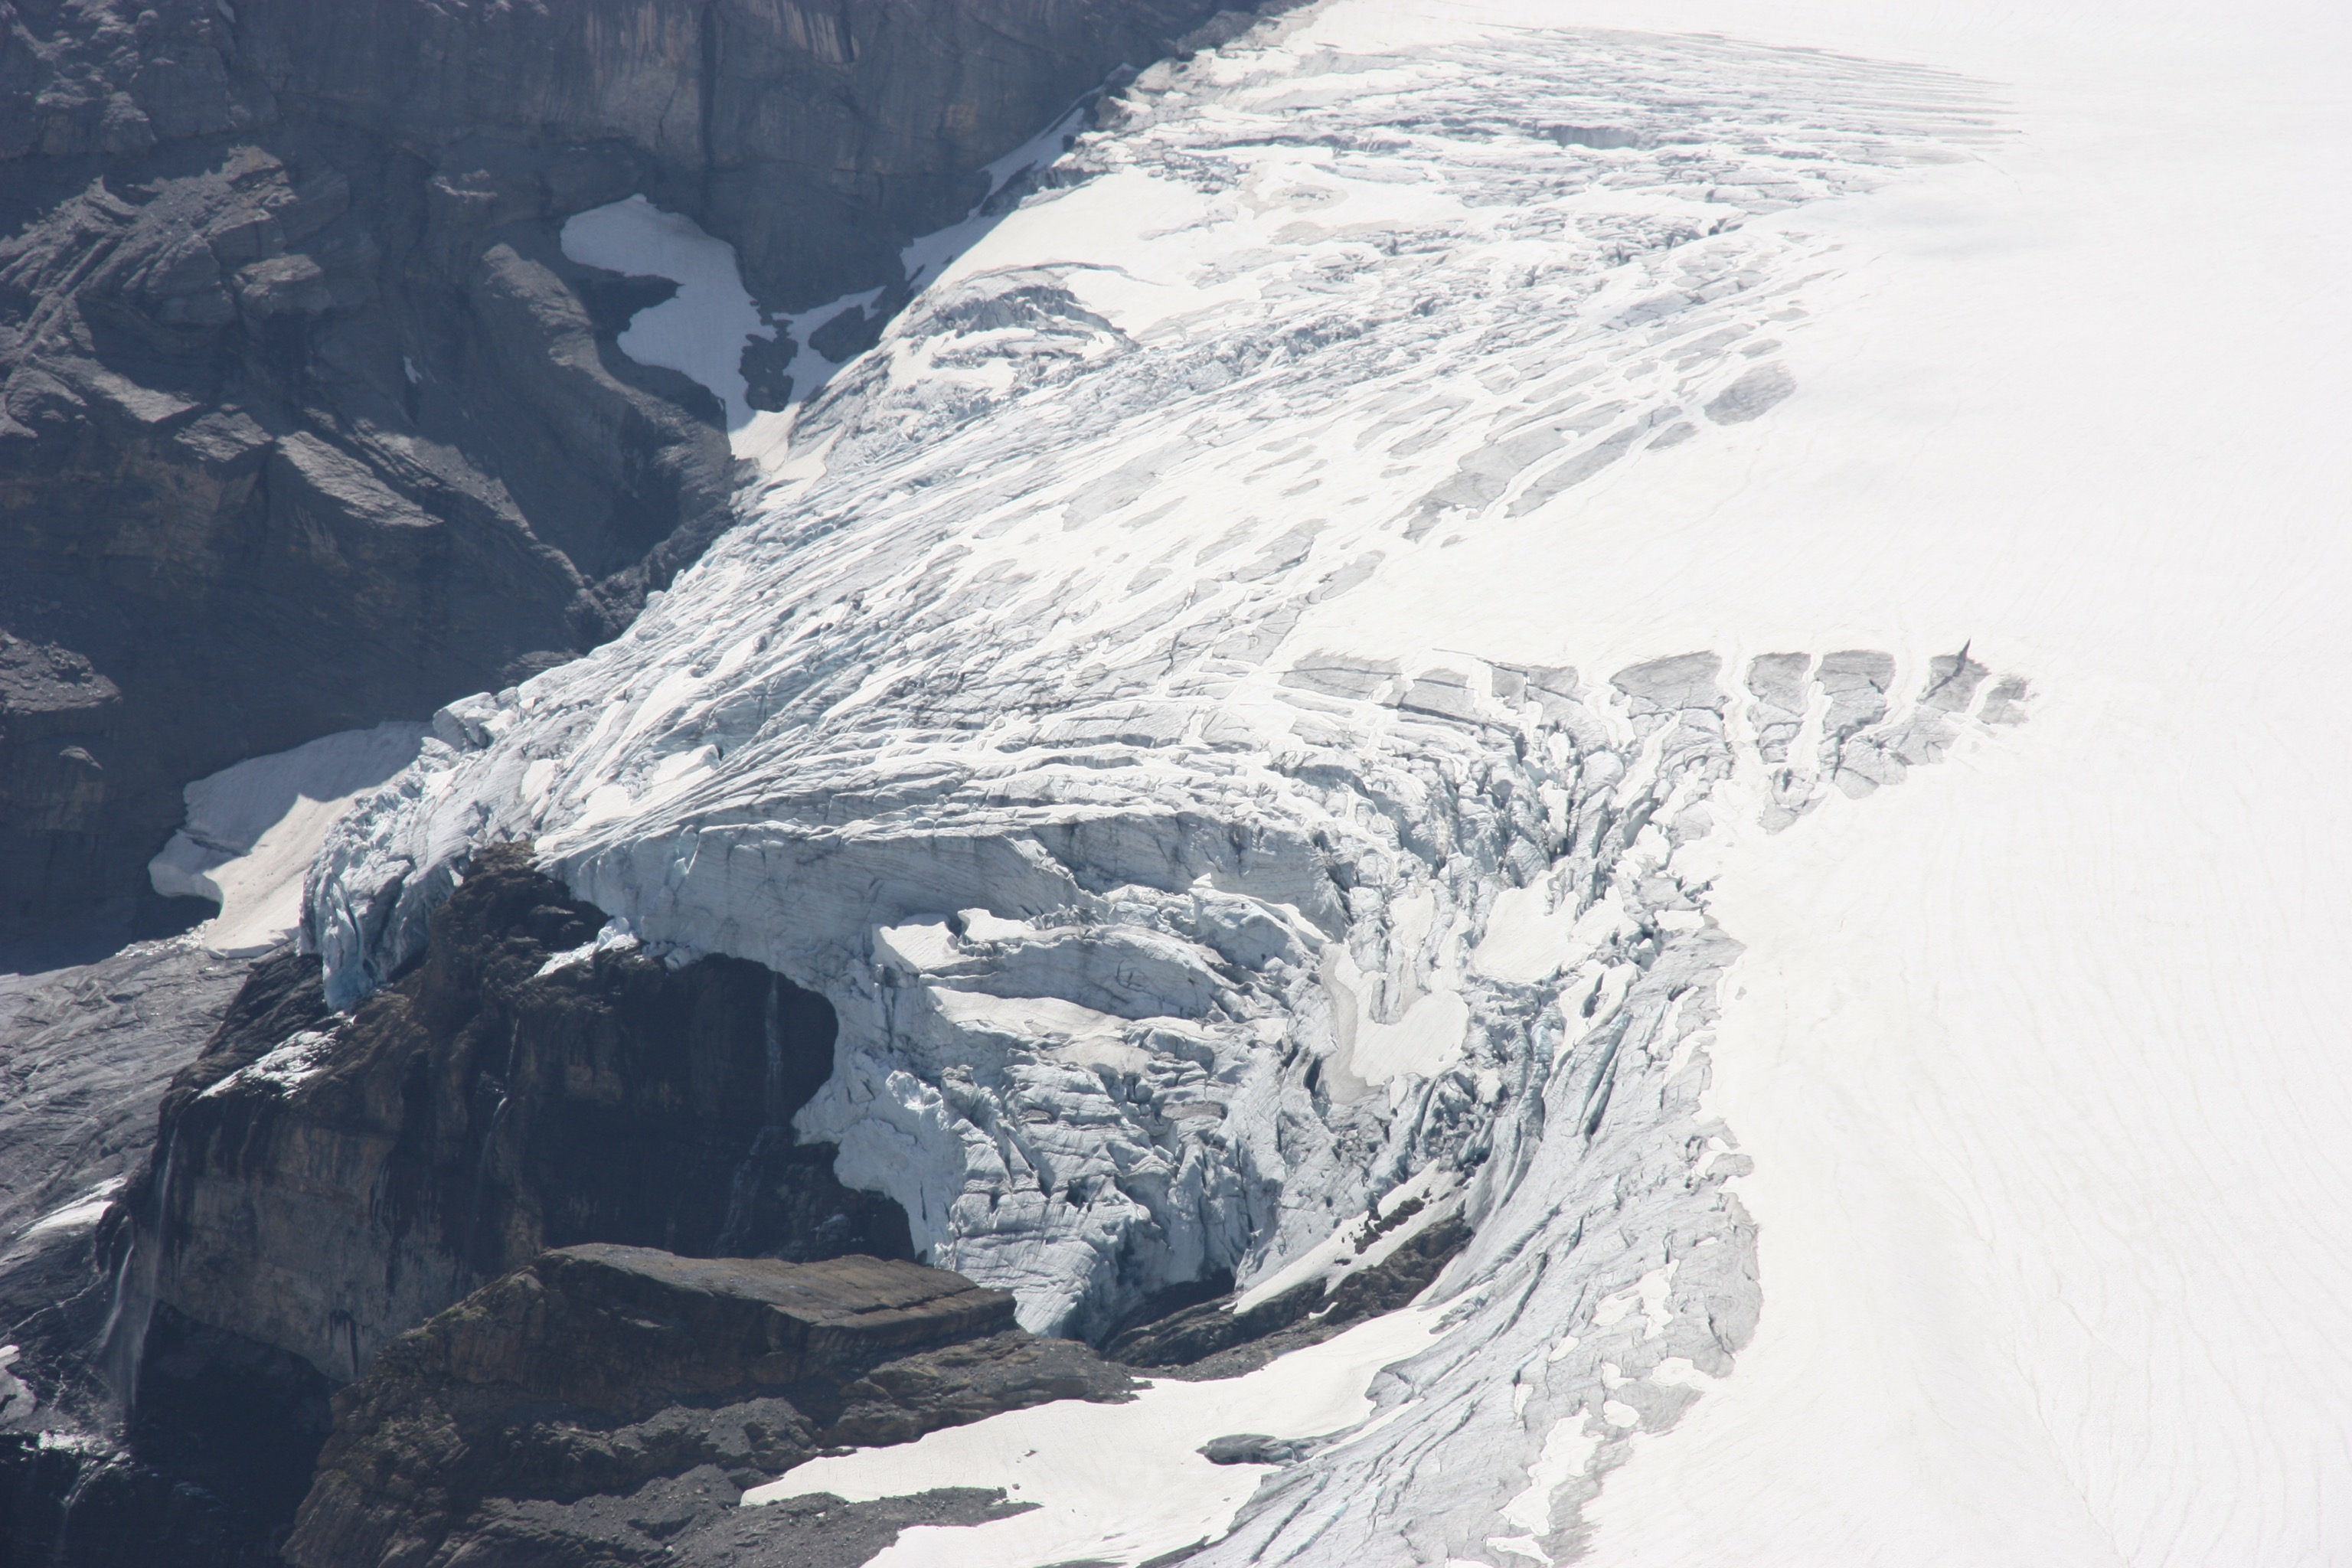 Close up of the edge of the Claridenfirn glacier, taken from the nearby peak of Gemsfairenstock. This glacier has the been subject of the longest climatological study of mass balance of any glacier in the world (100 years)